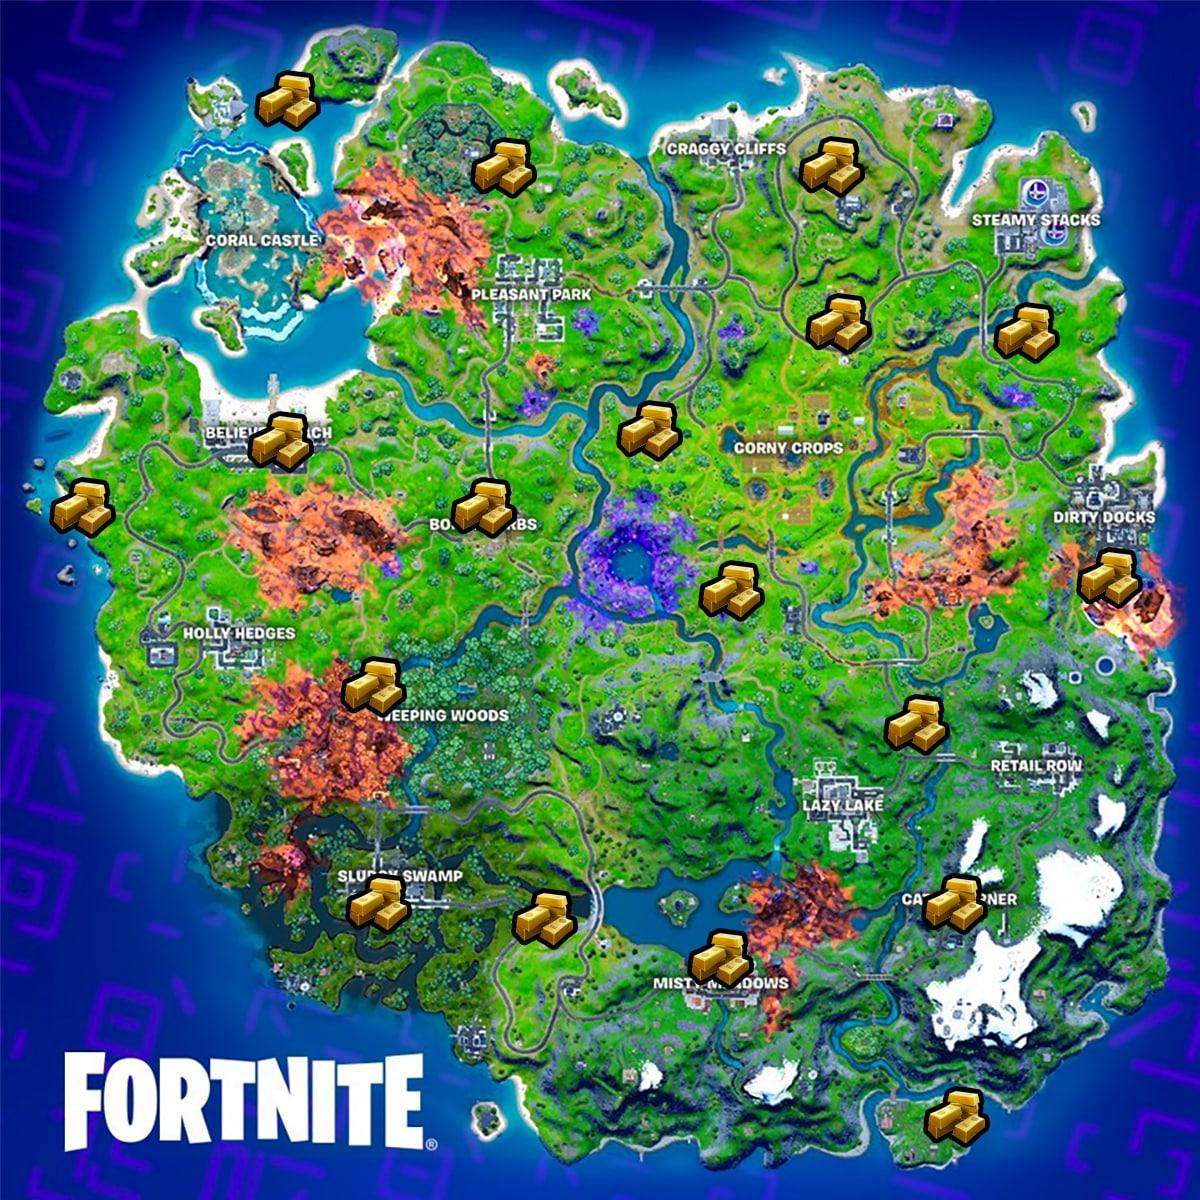 All Bounty Board locations marked on the Fortnite Season 8 map